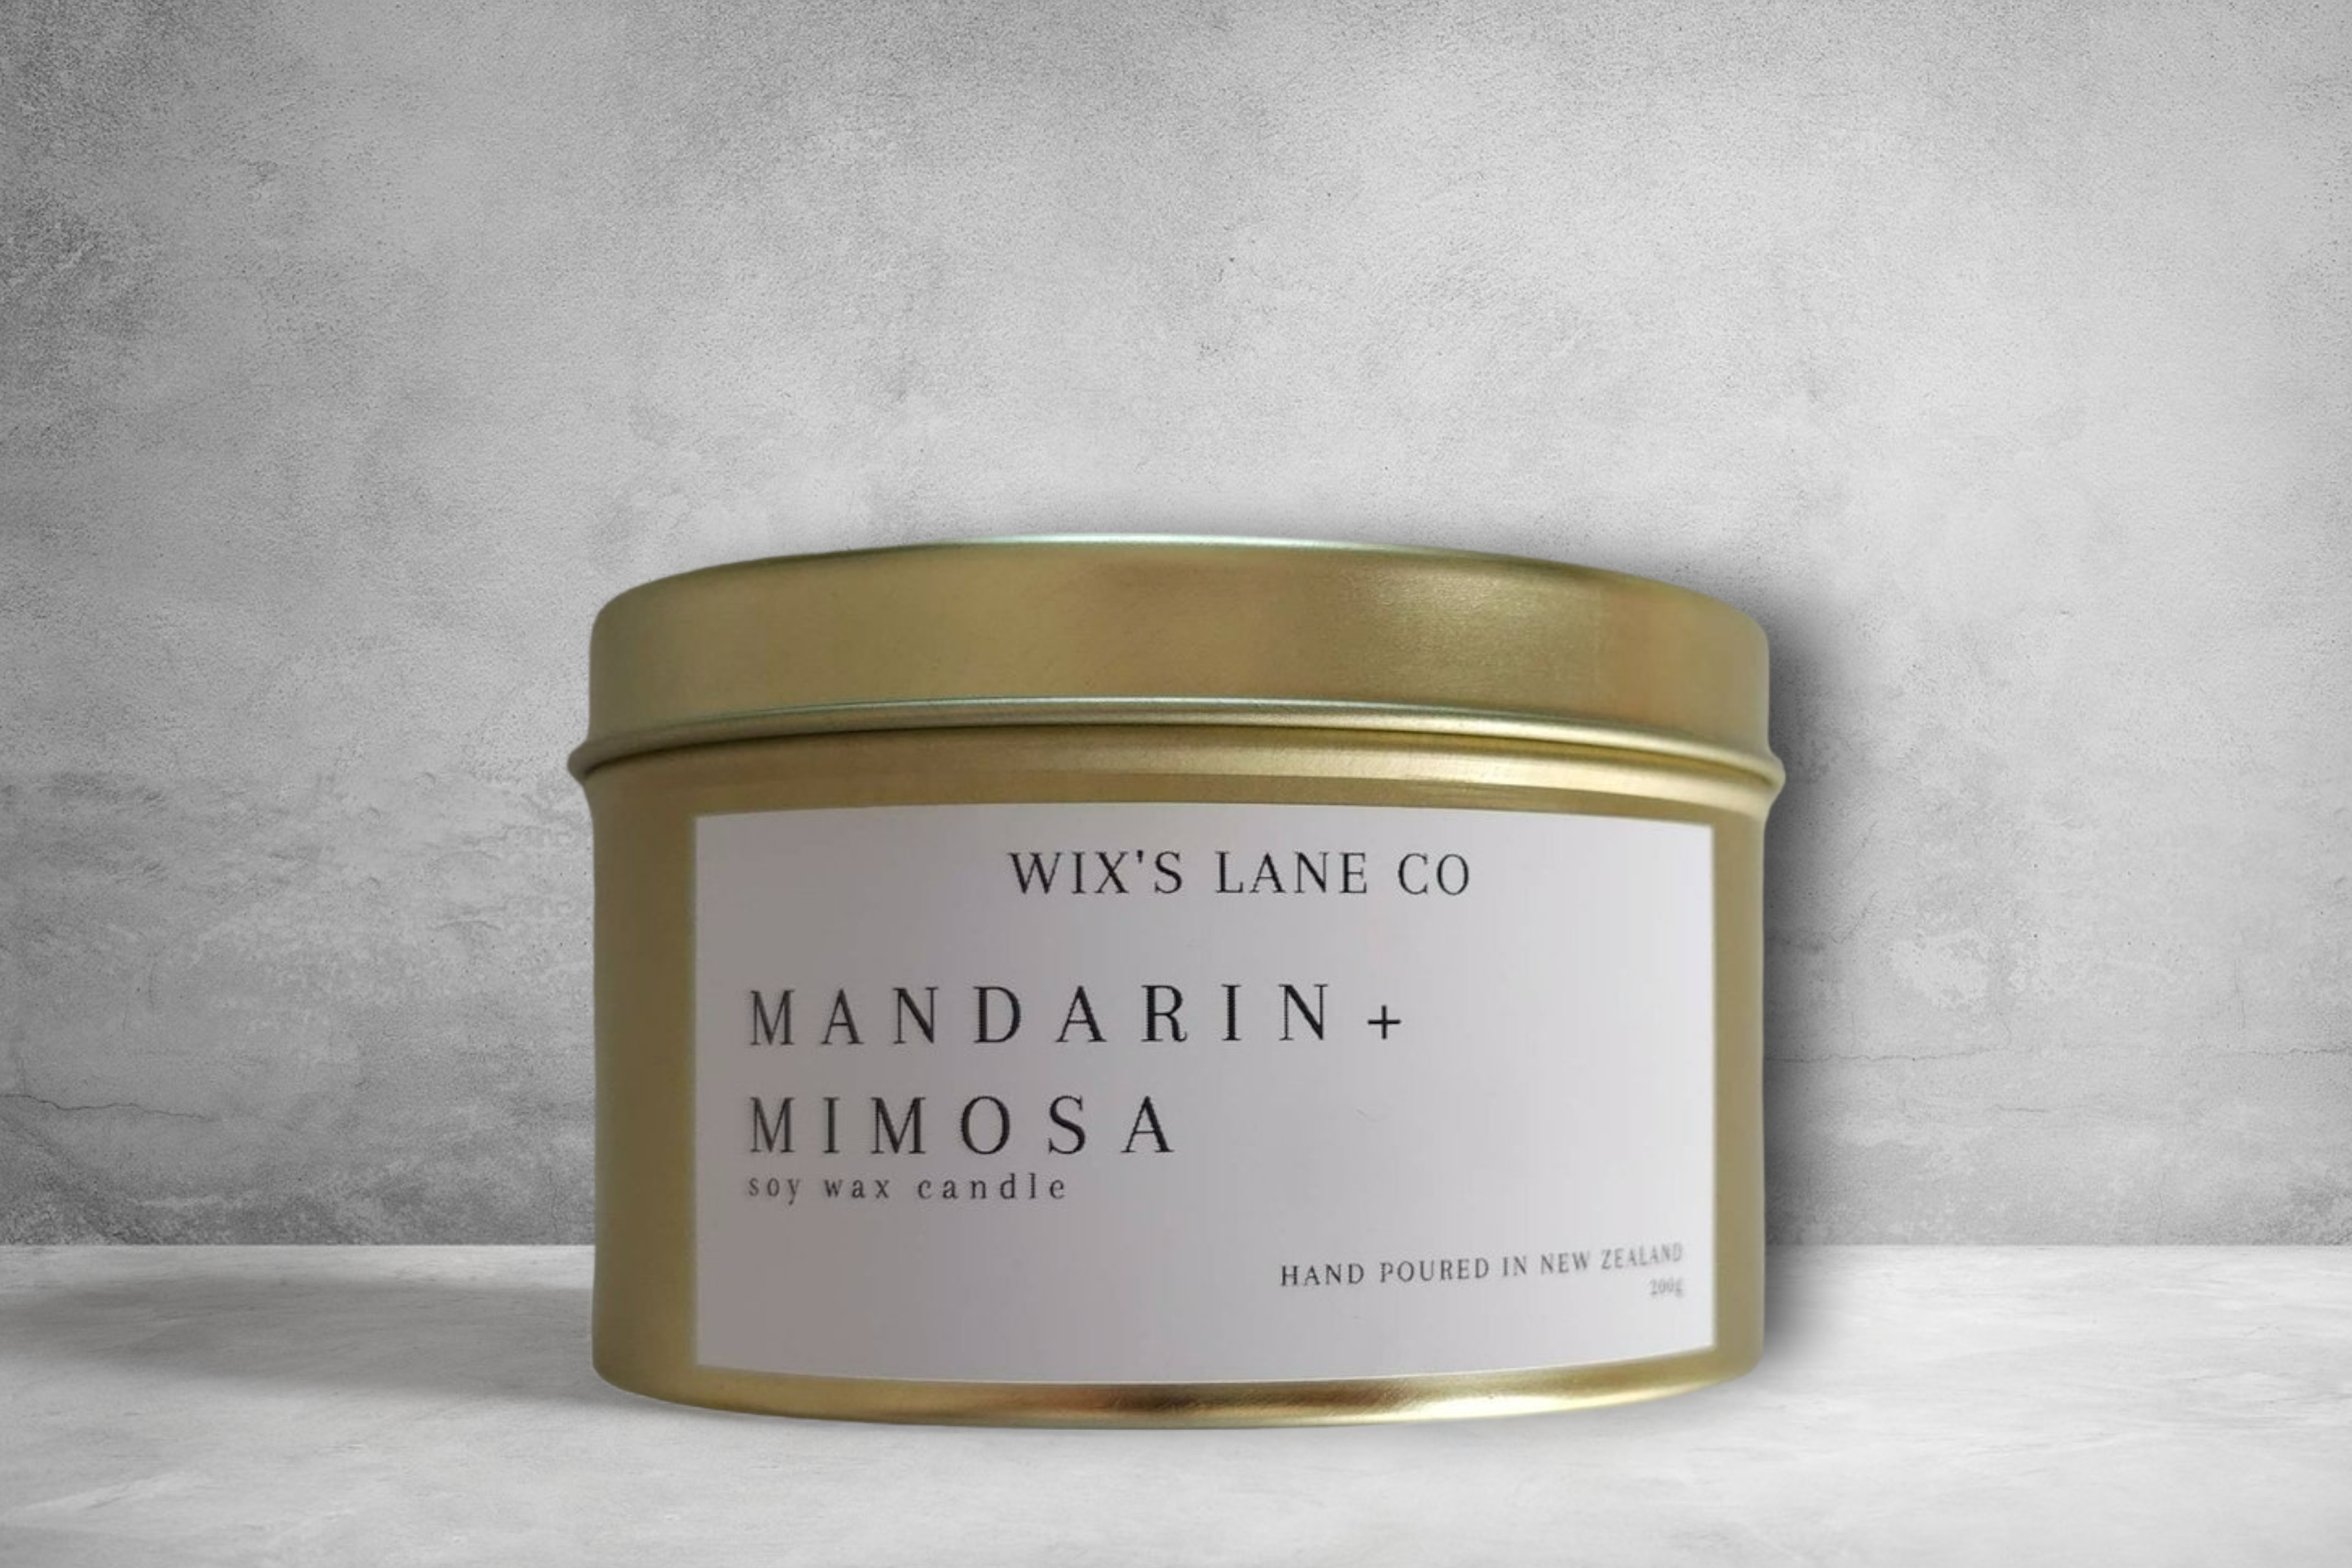 A tranquil golden Mindful Moments soy wax candle by giftbox co. with mandarin + mimosa scent, hand poured in New Zealand, displayed against a textured grey background.